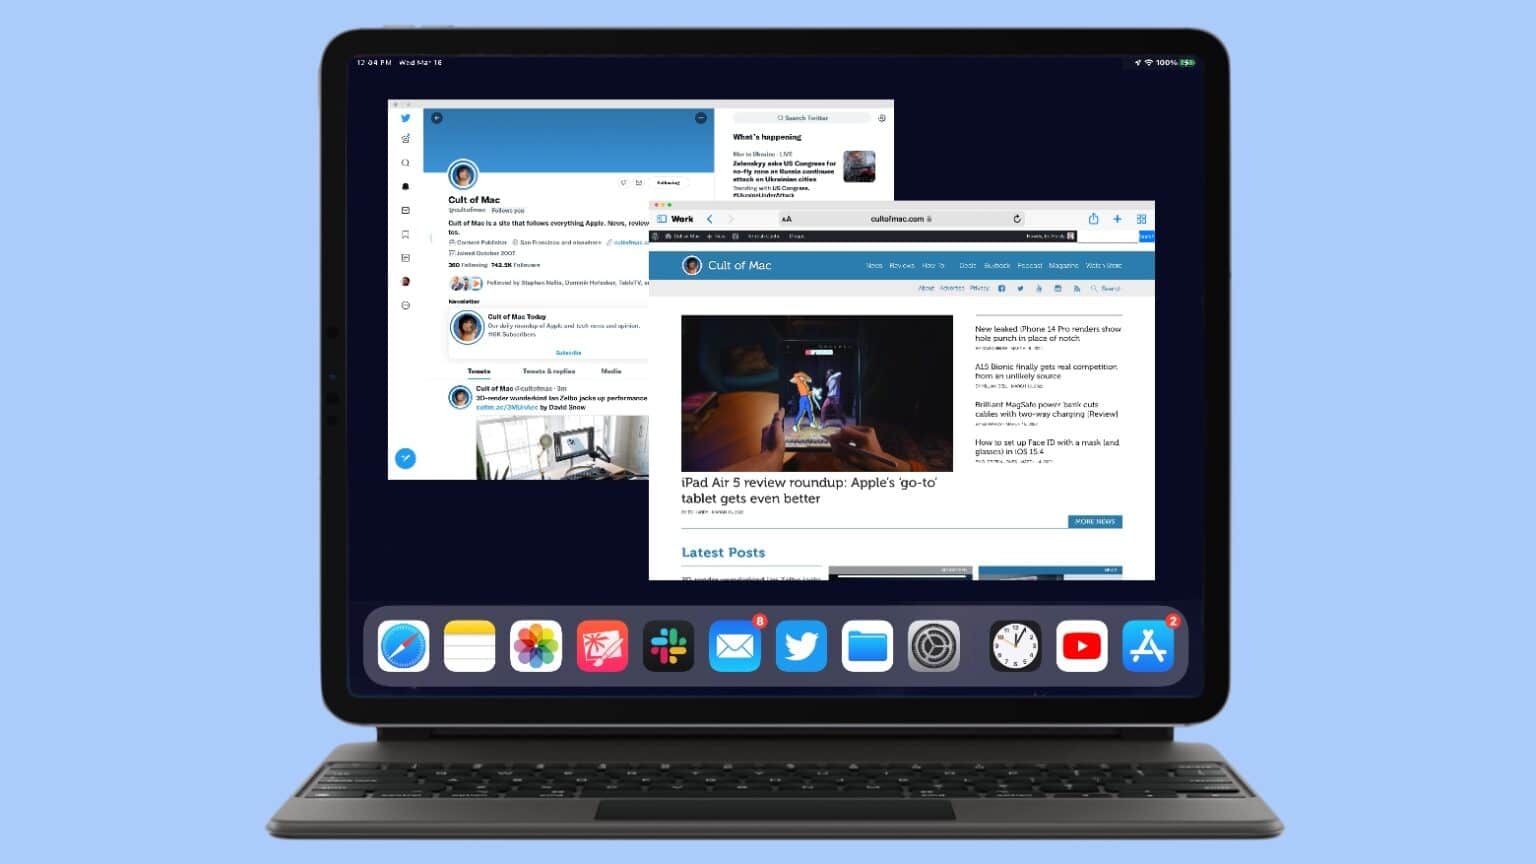 Floating app windows could be coming to iPad. Finally.